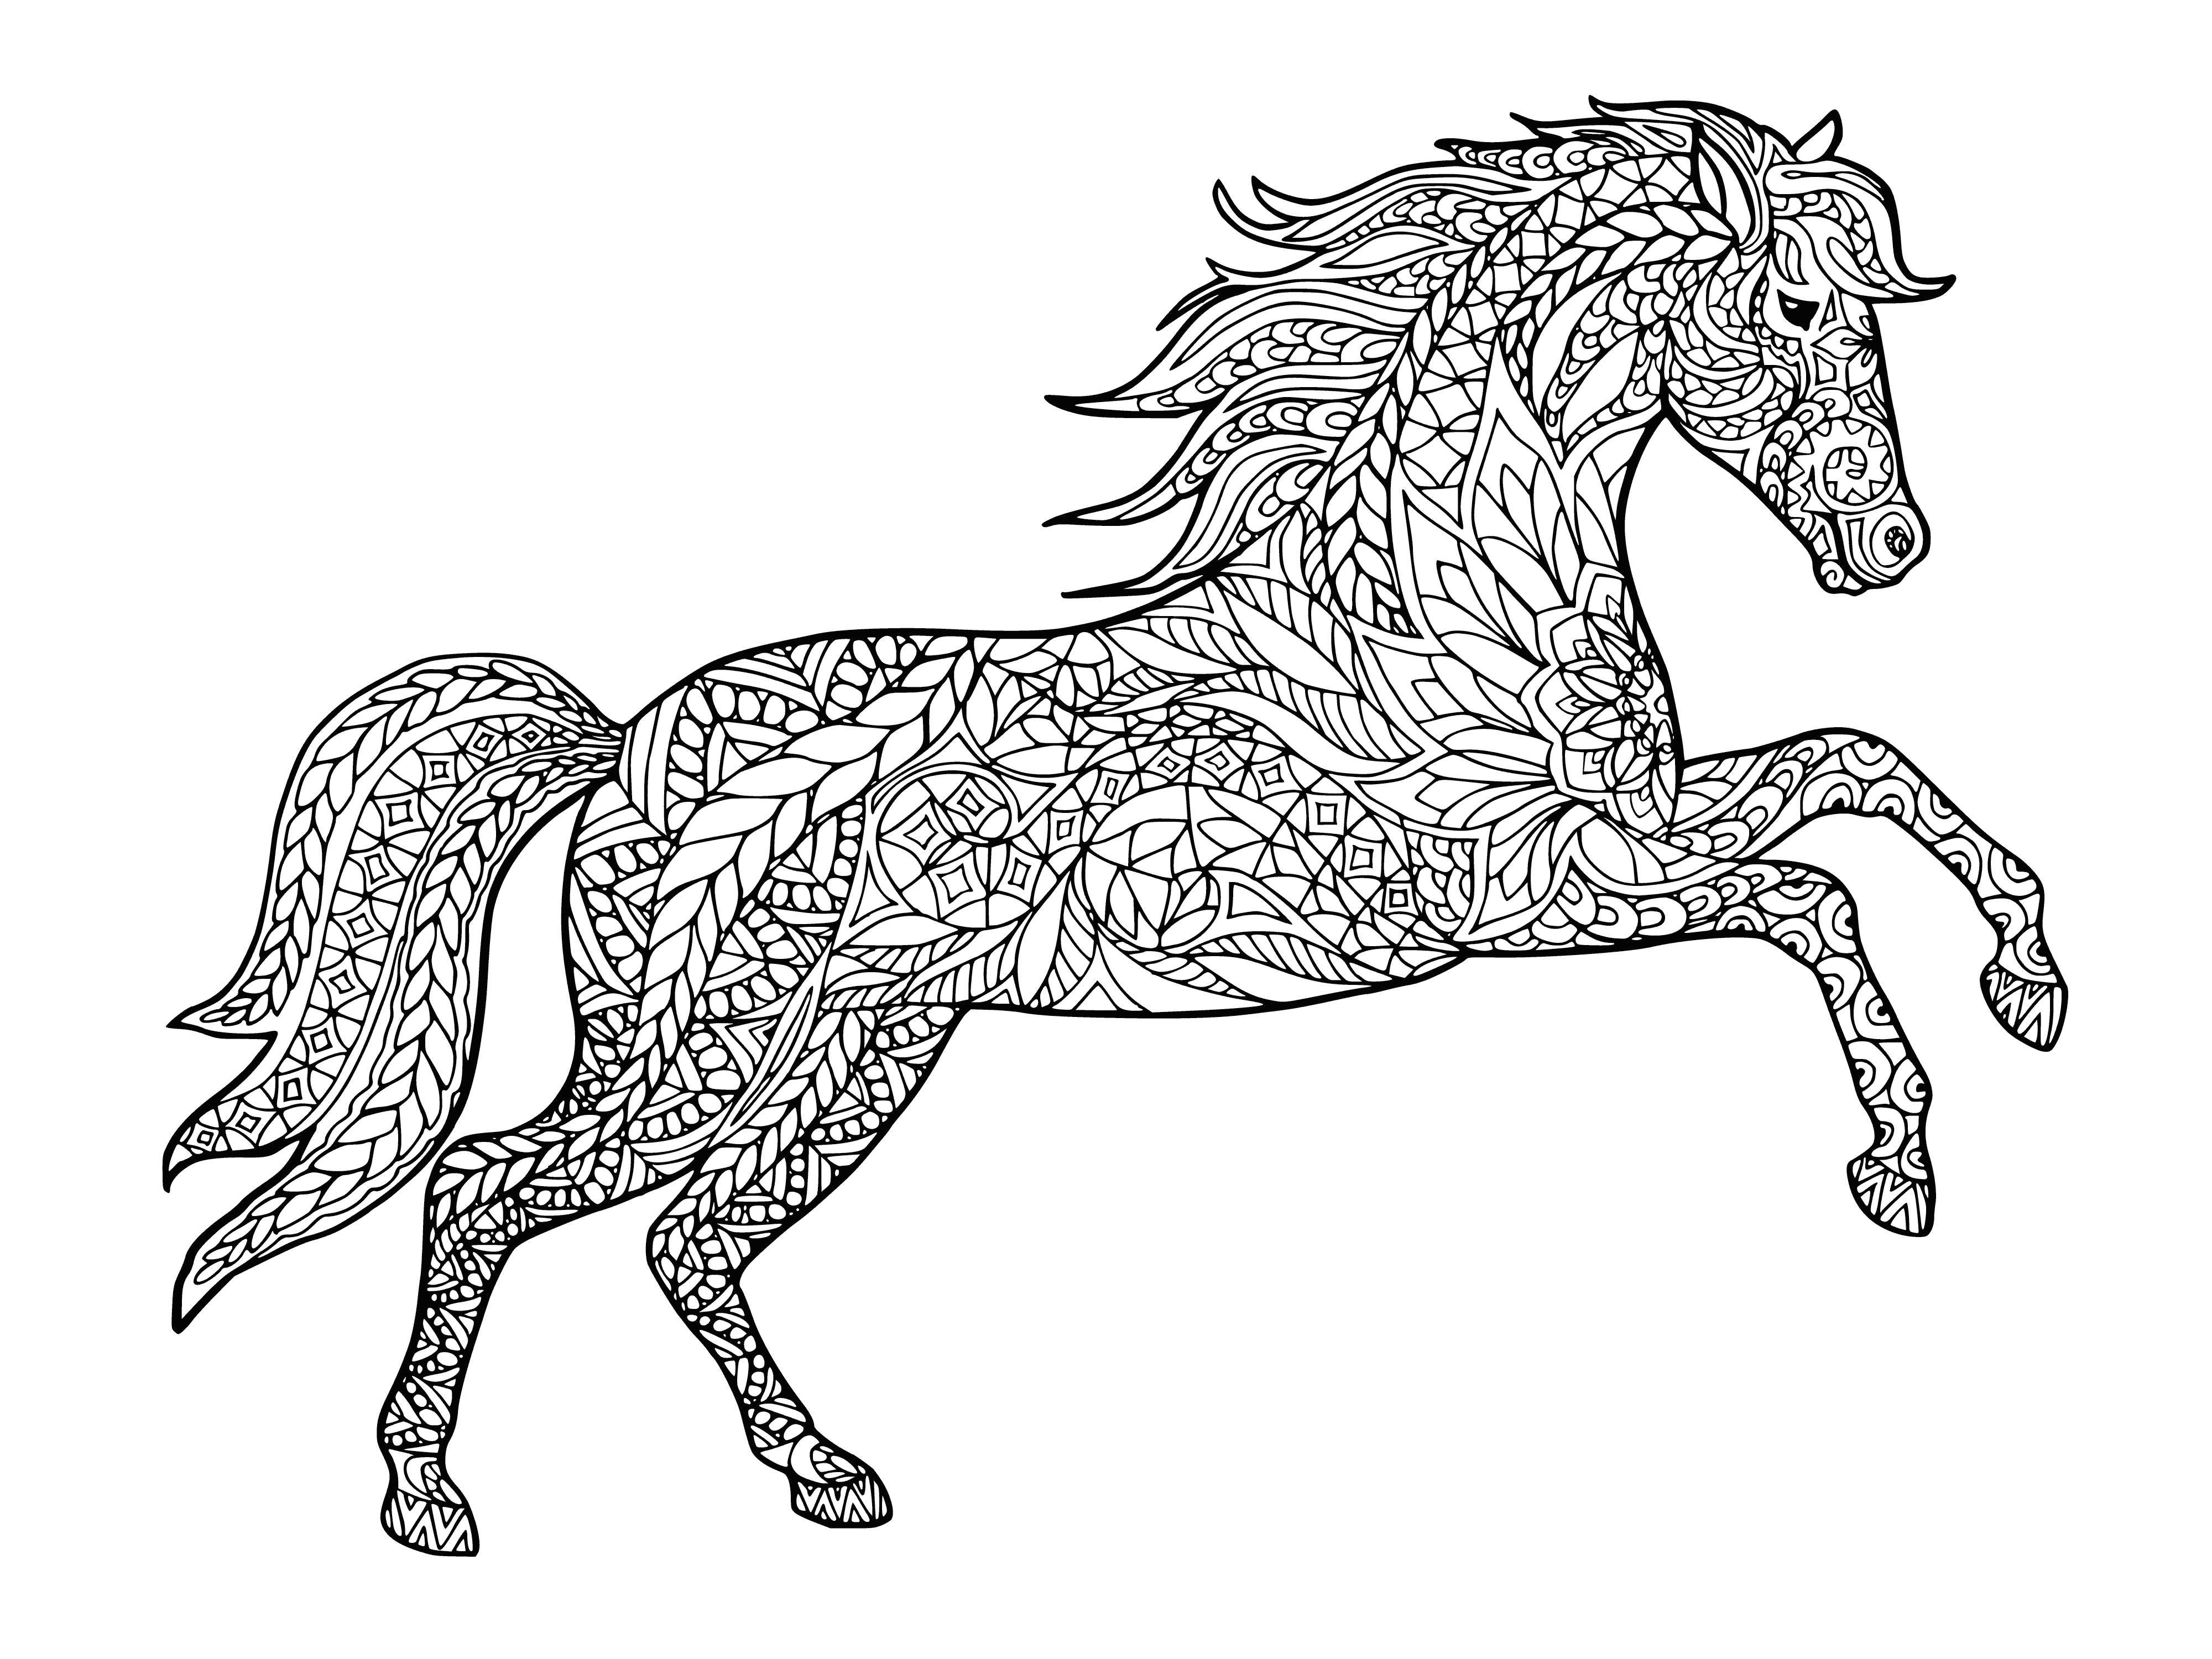 coloring page: Coloring pages of a black and white horse in a stable, eating hay and drinking water from a bucket. #animals #coloringpages #horse